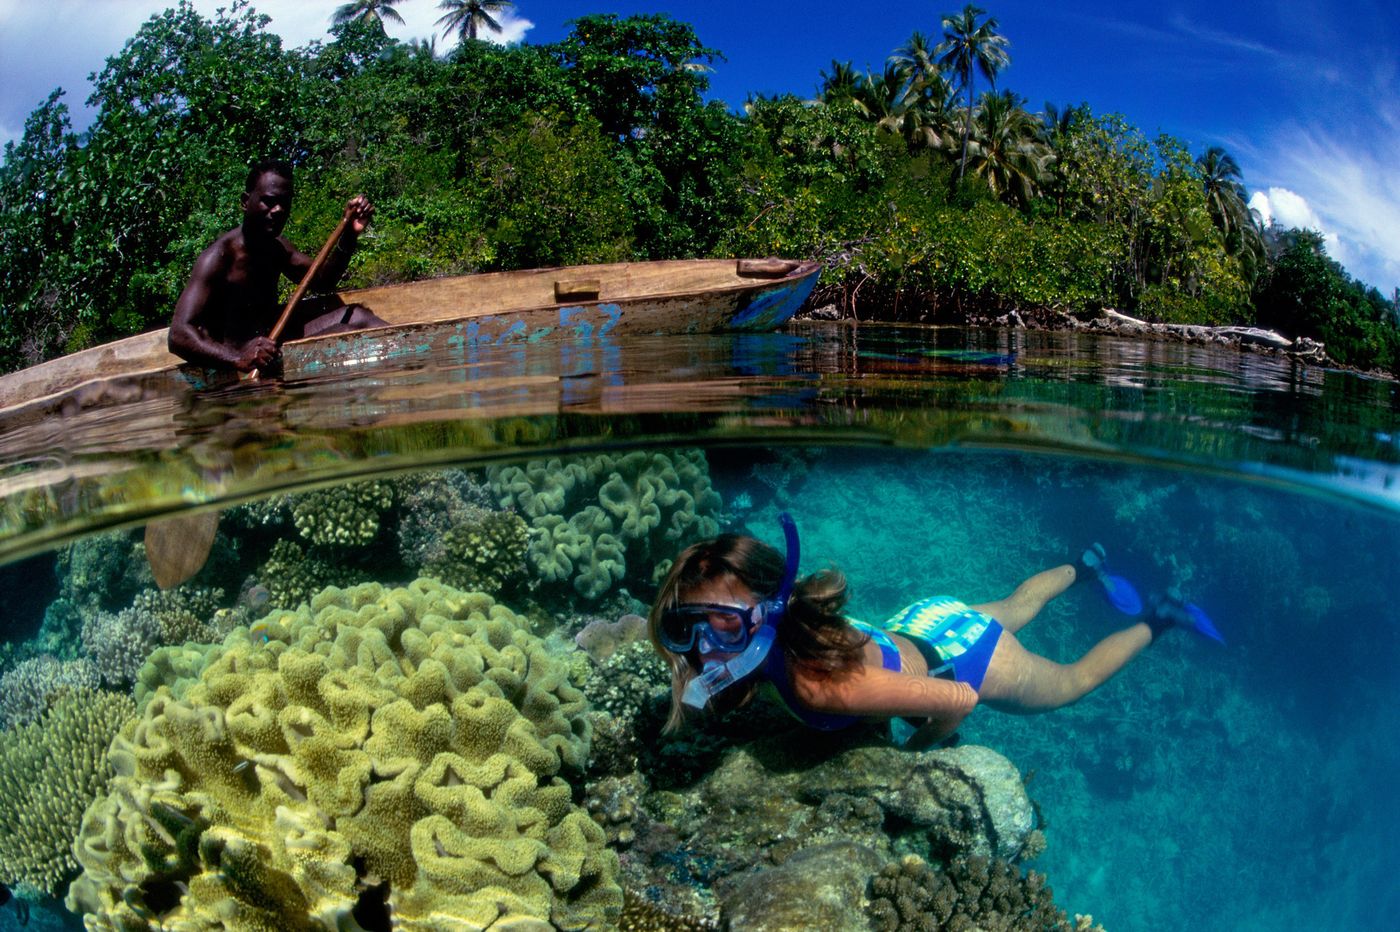 The Solomon Islands are known for wreck dives, but there's so much more